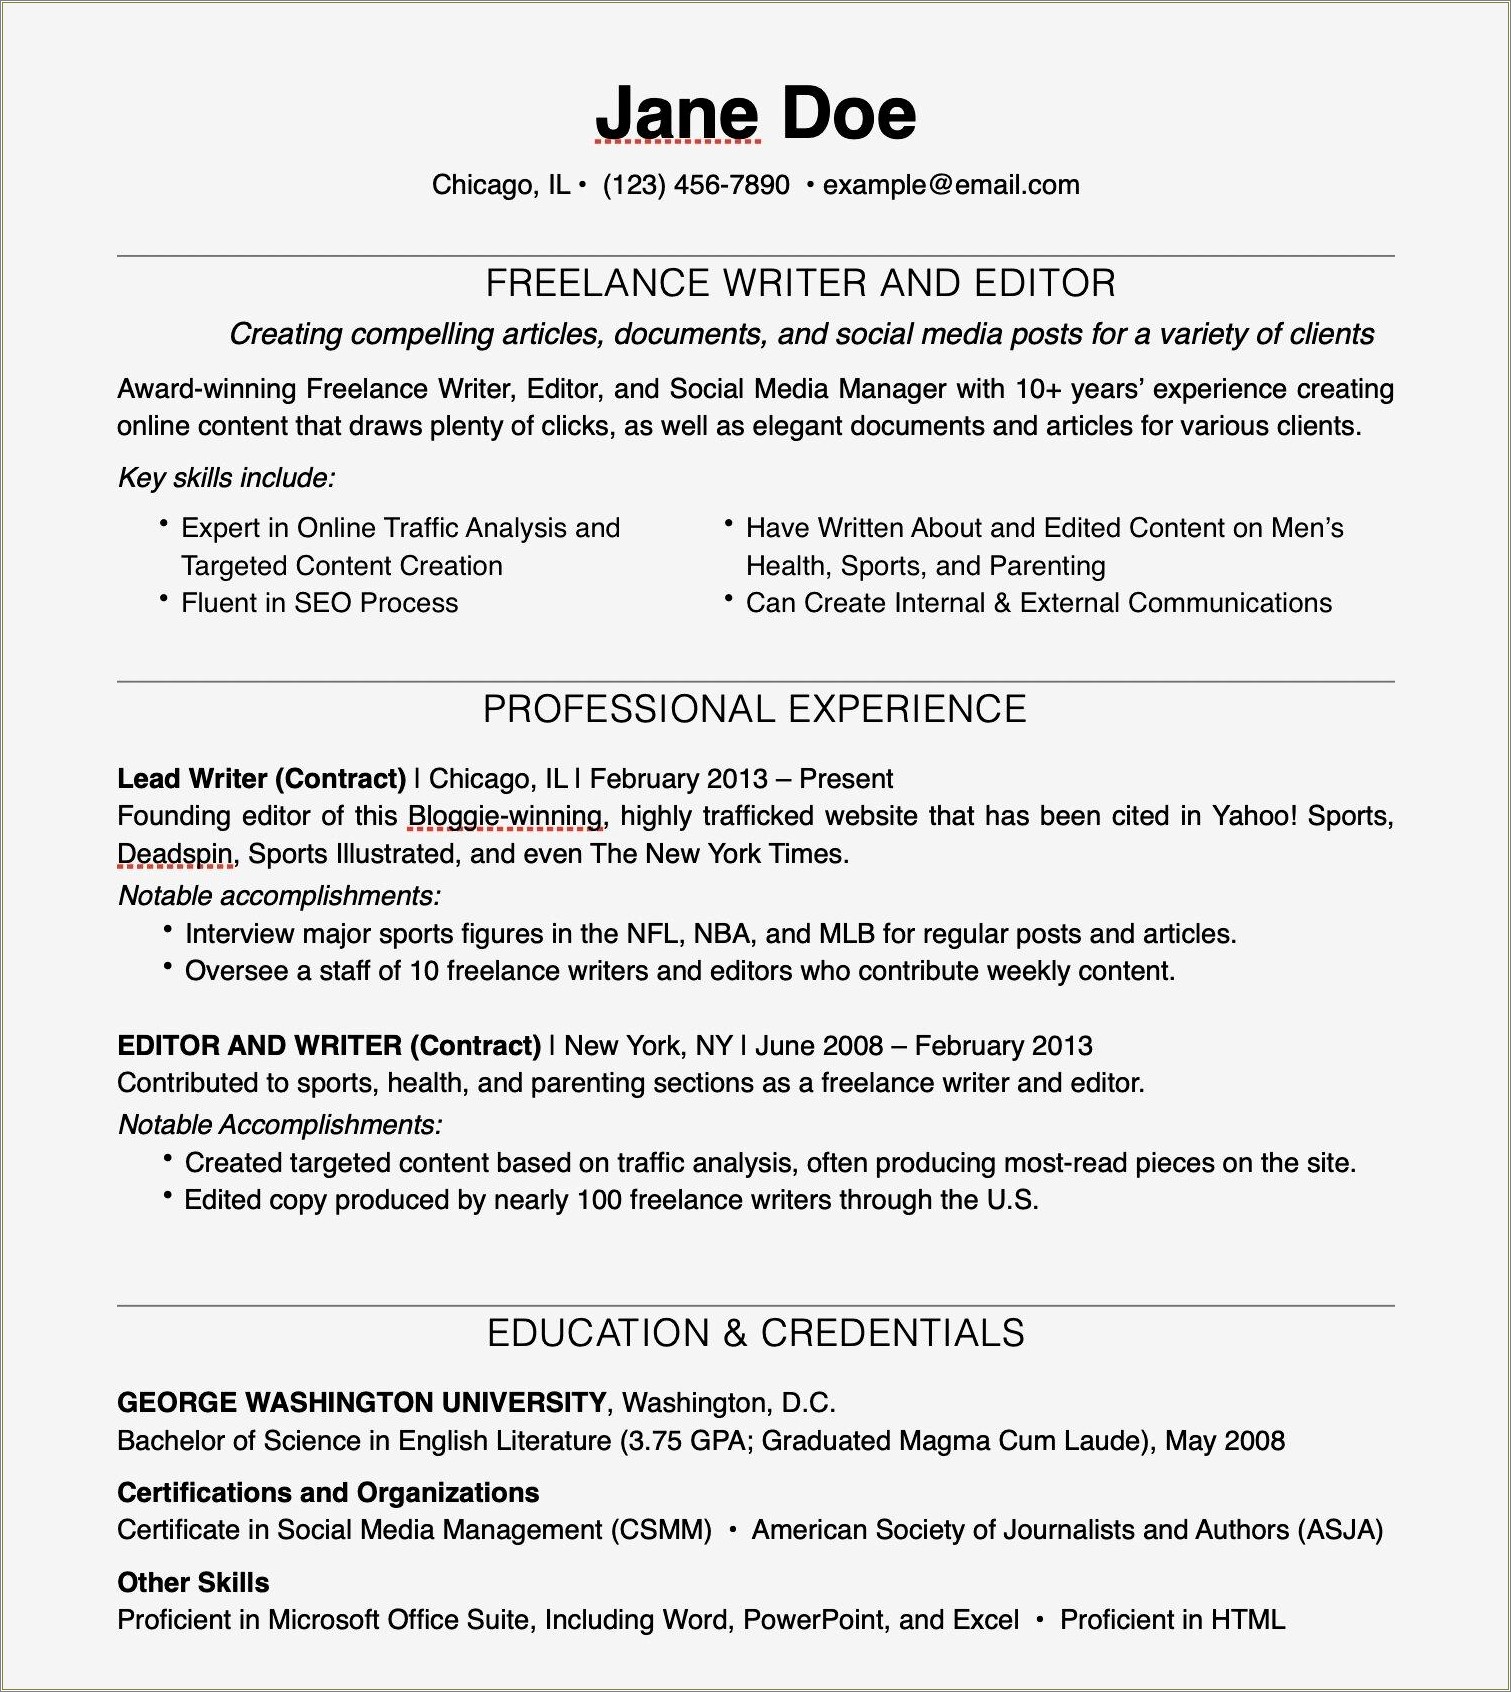 Freelance Experience Business Analyst Resume Samples